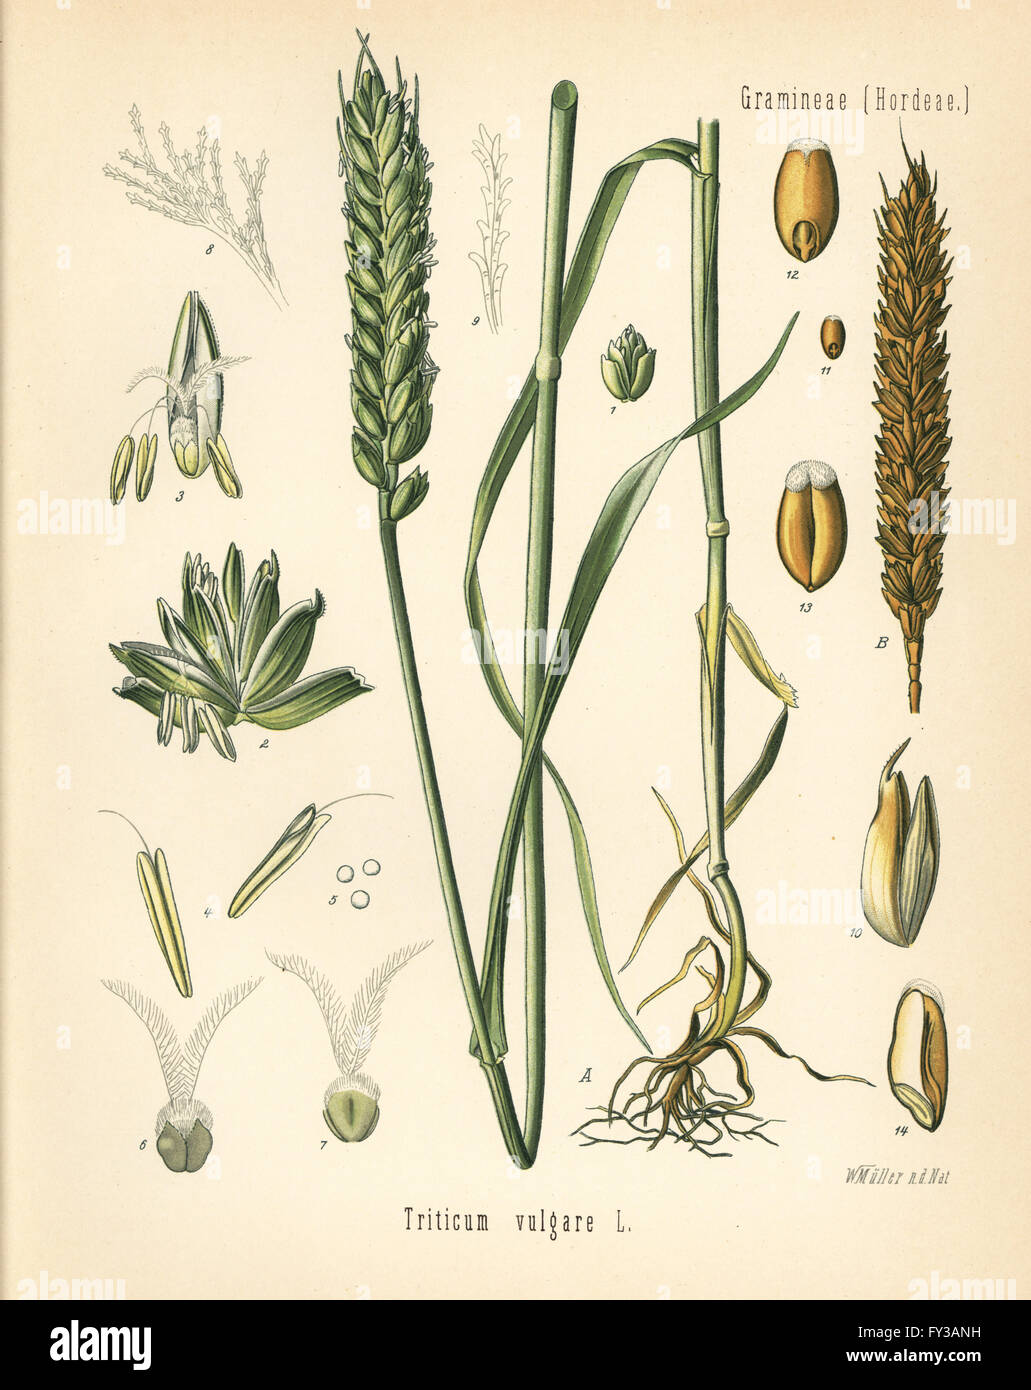 Wheat or bread wheat, Triticum vulgare. Chromolithograph after a botanical illustration by Walther Muller from Hermann Adolph Koehler's Medicinal Plants, edited by Gustav Pabst, Koehler, Germany, 1887. Stock Photo